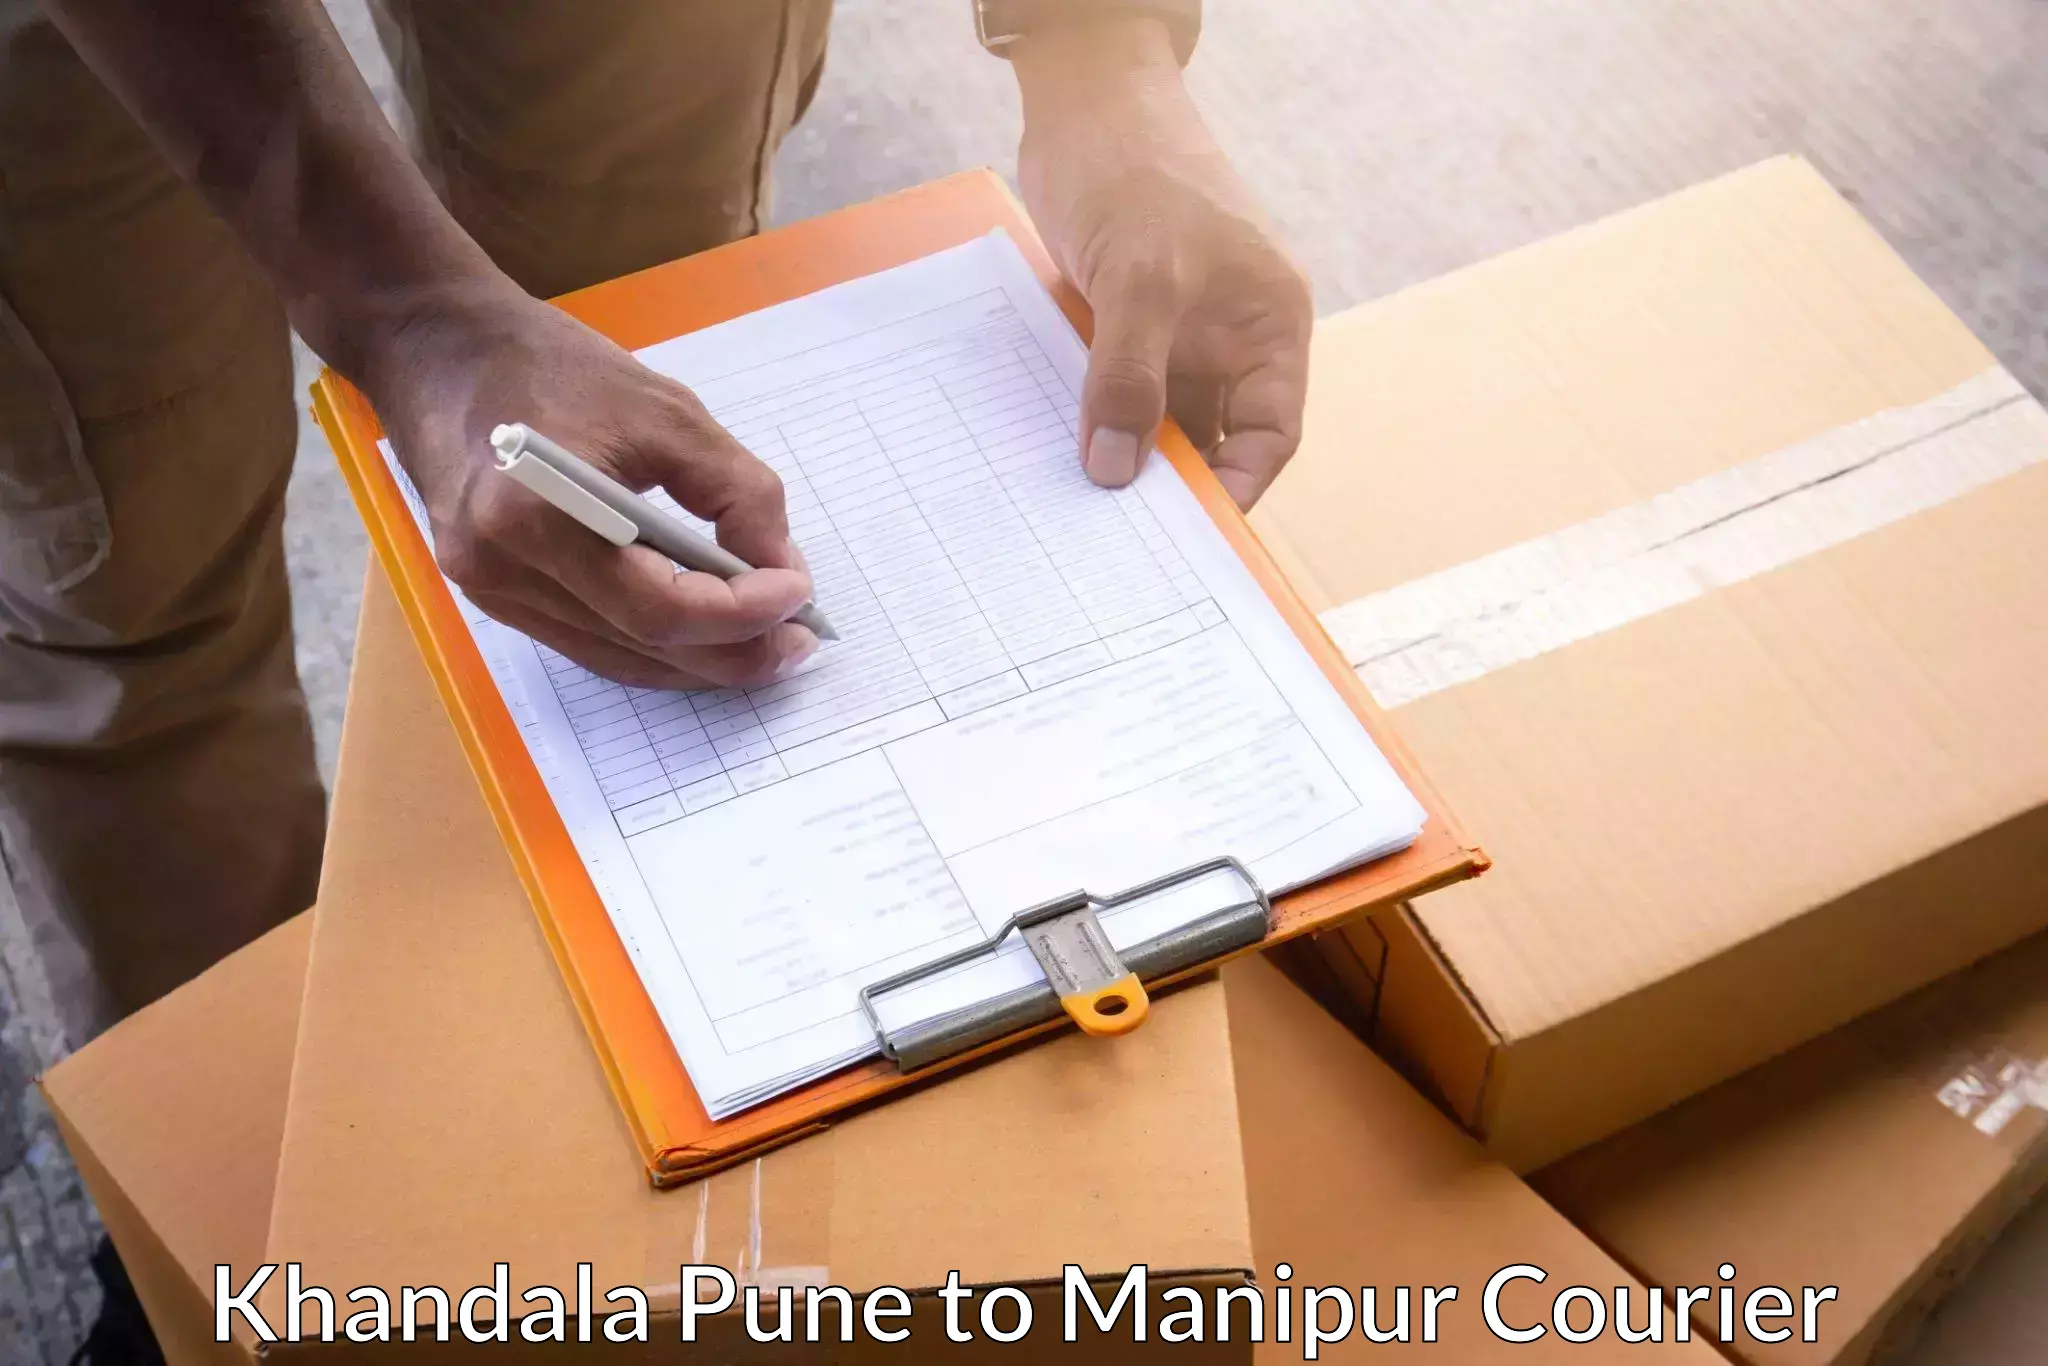 Courier rate comparison Khandala Pune to Manipur